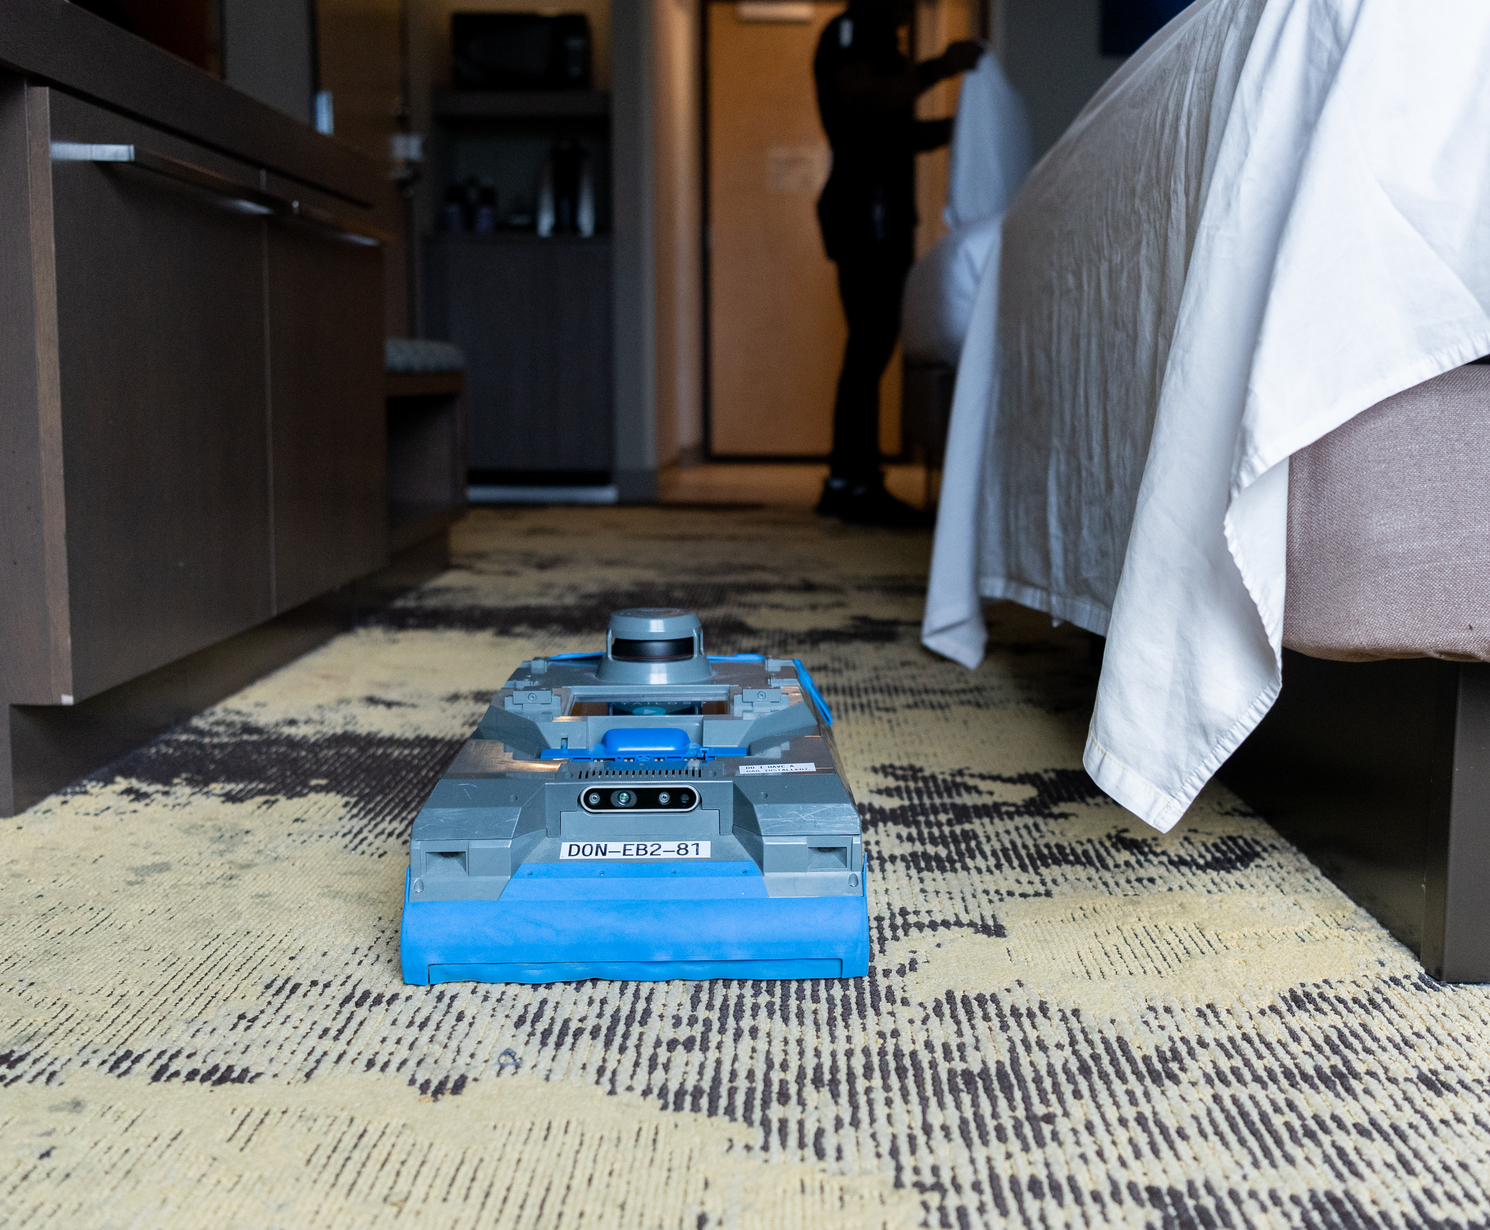 Cleaning Robot vacuuming the floor of a hotel room